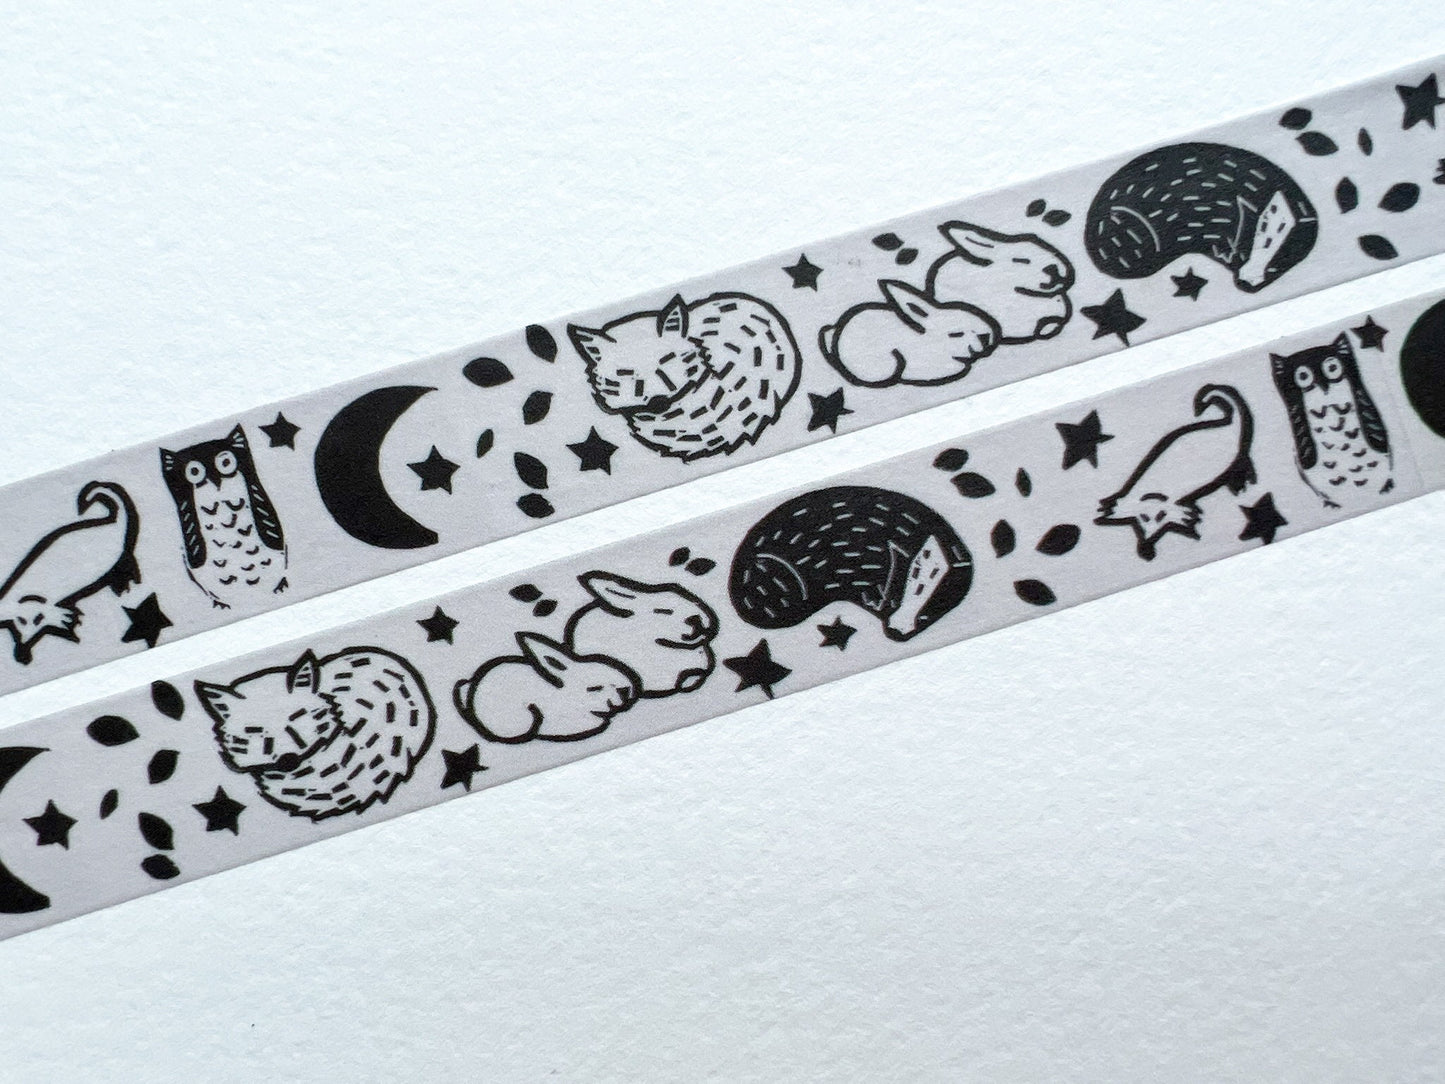 A close up of washi tape that's based on a lino print of woodland animals